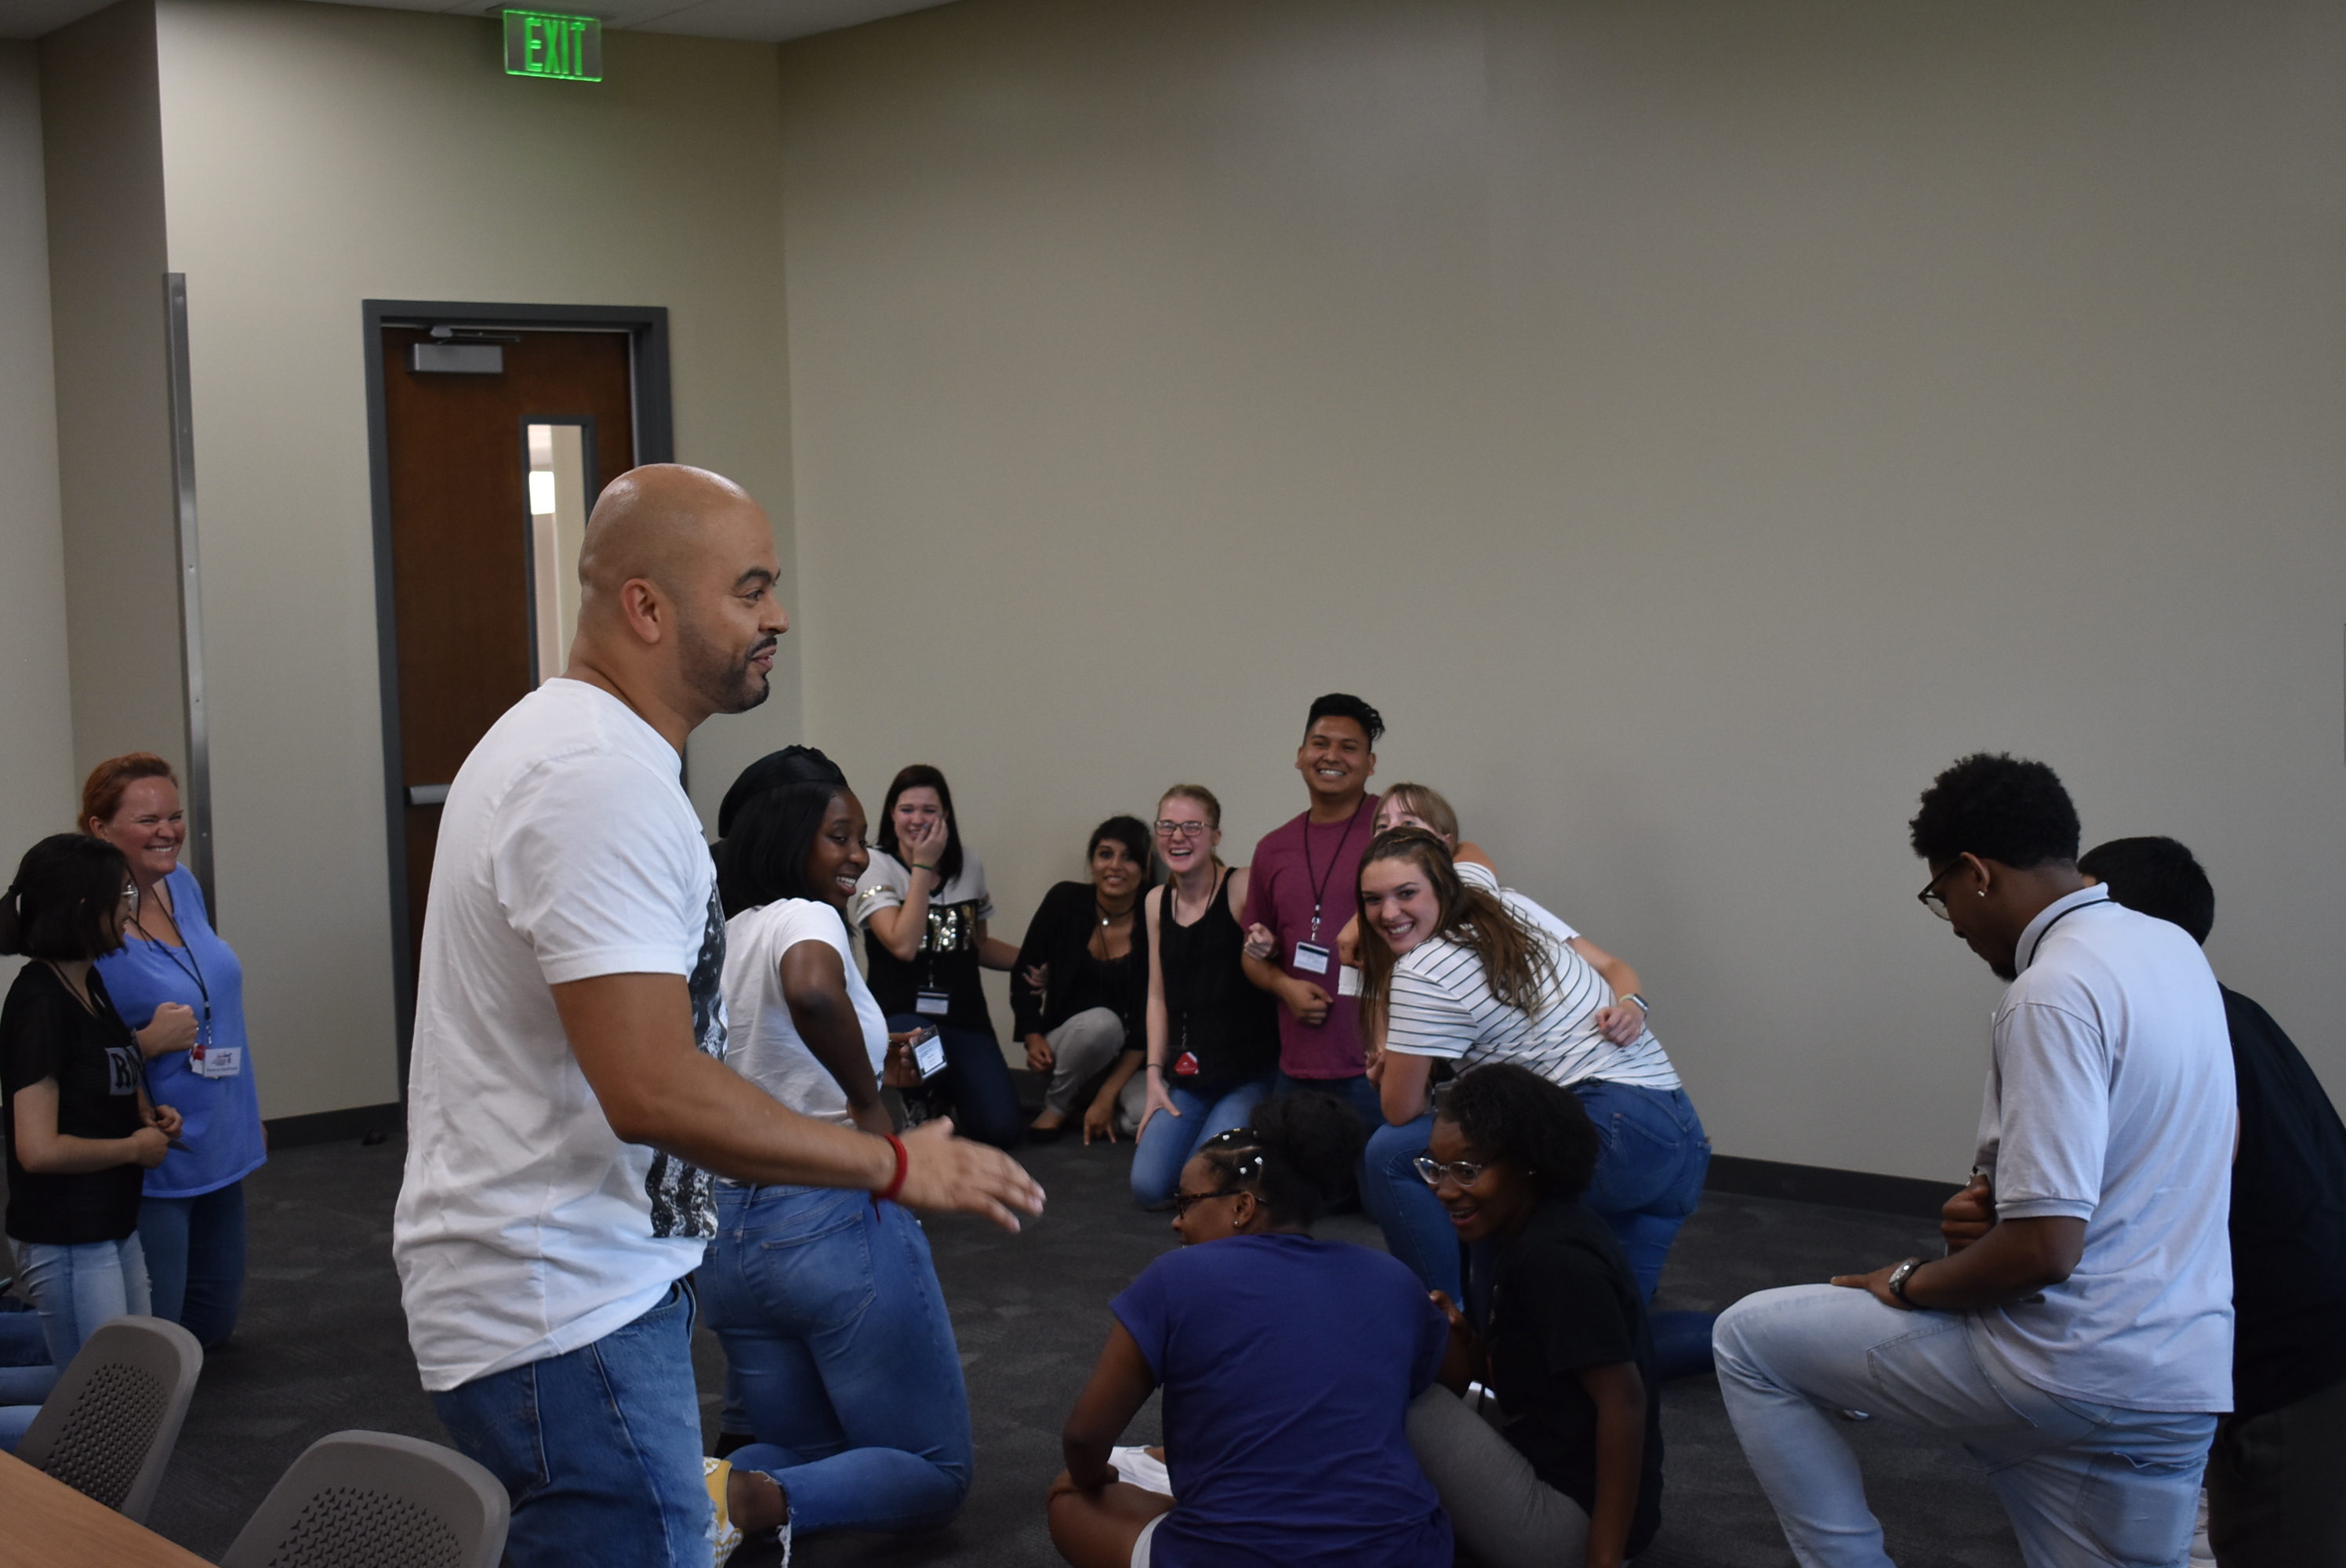 A man in a white shirt and jeans wears a bemused expression as he leads a group of young people through a teambuilding exercise.